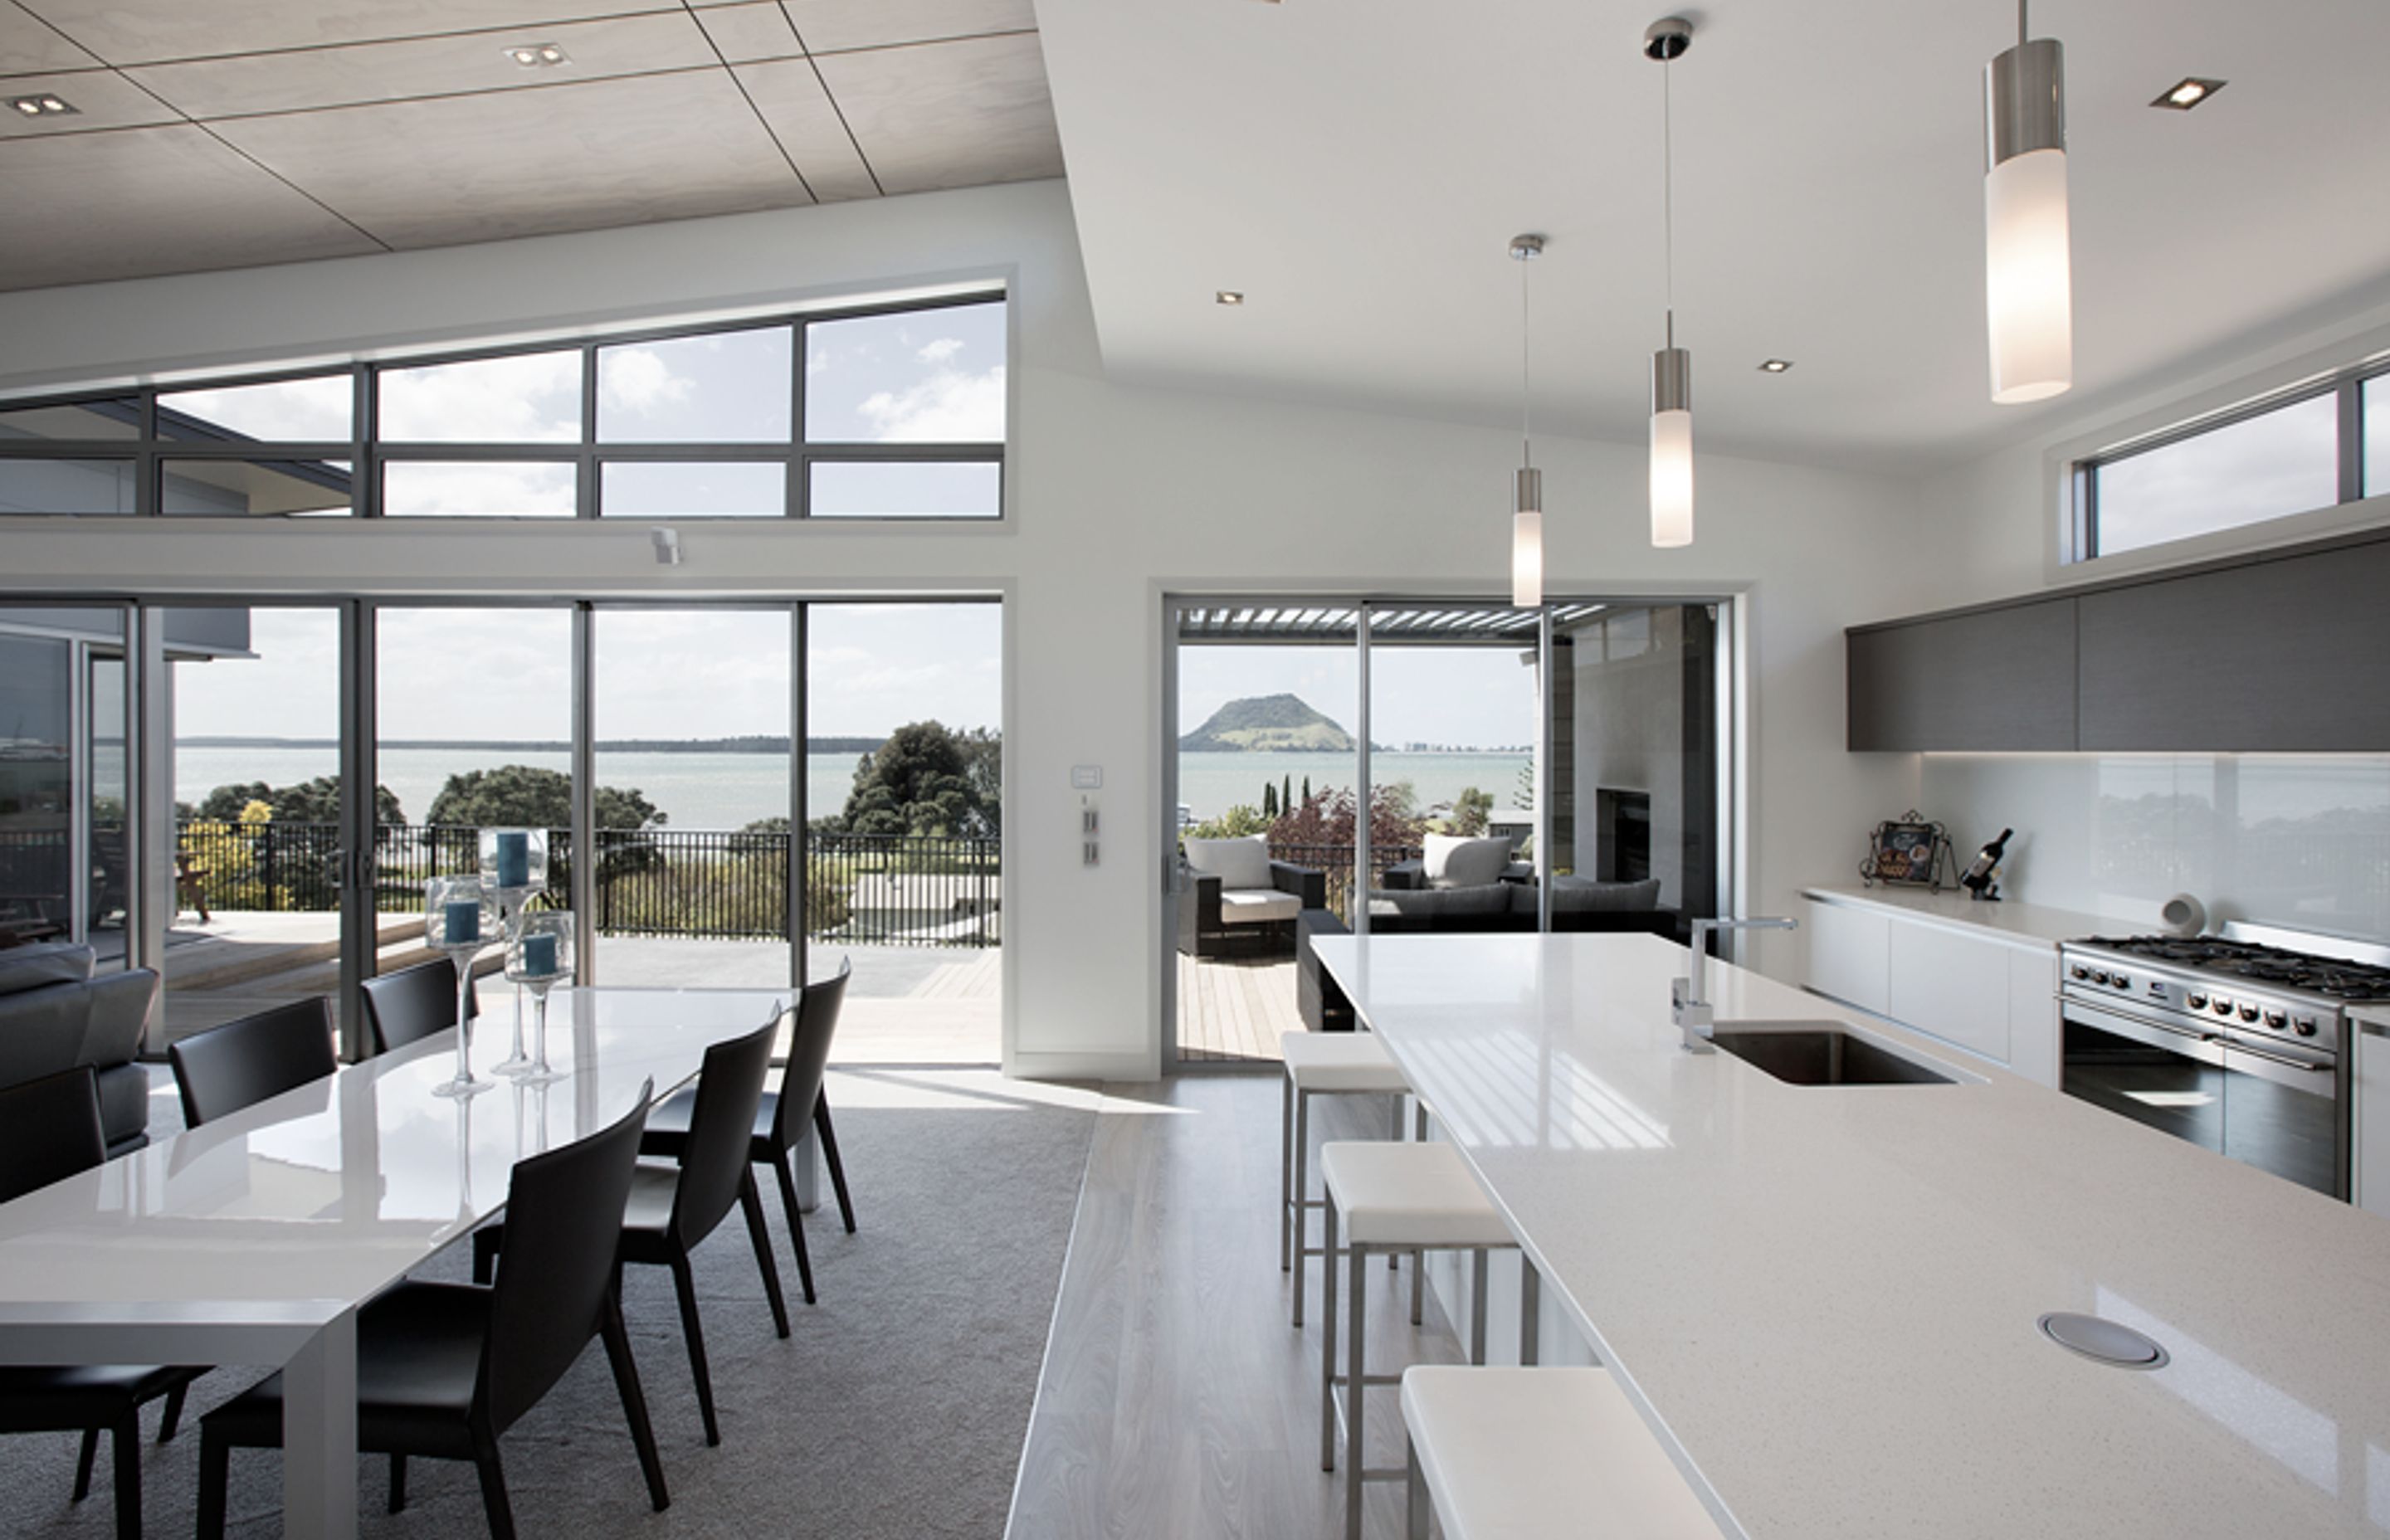 With amazing views out to Matakana and Mount Maunganui this three bedroom home stretches along the ridgeline and is built to take in the views.